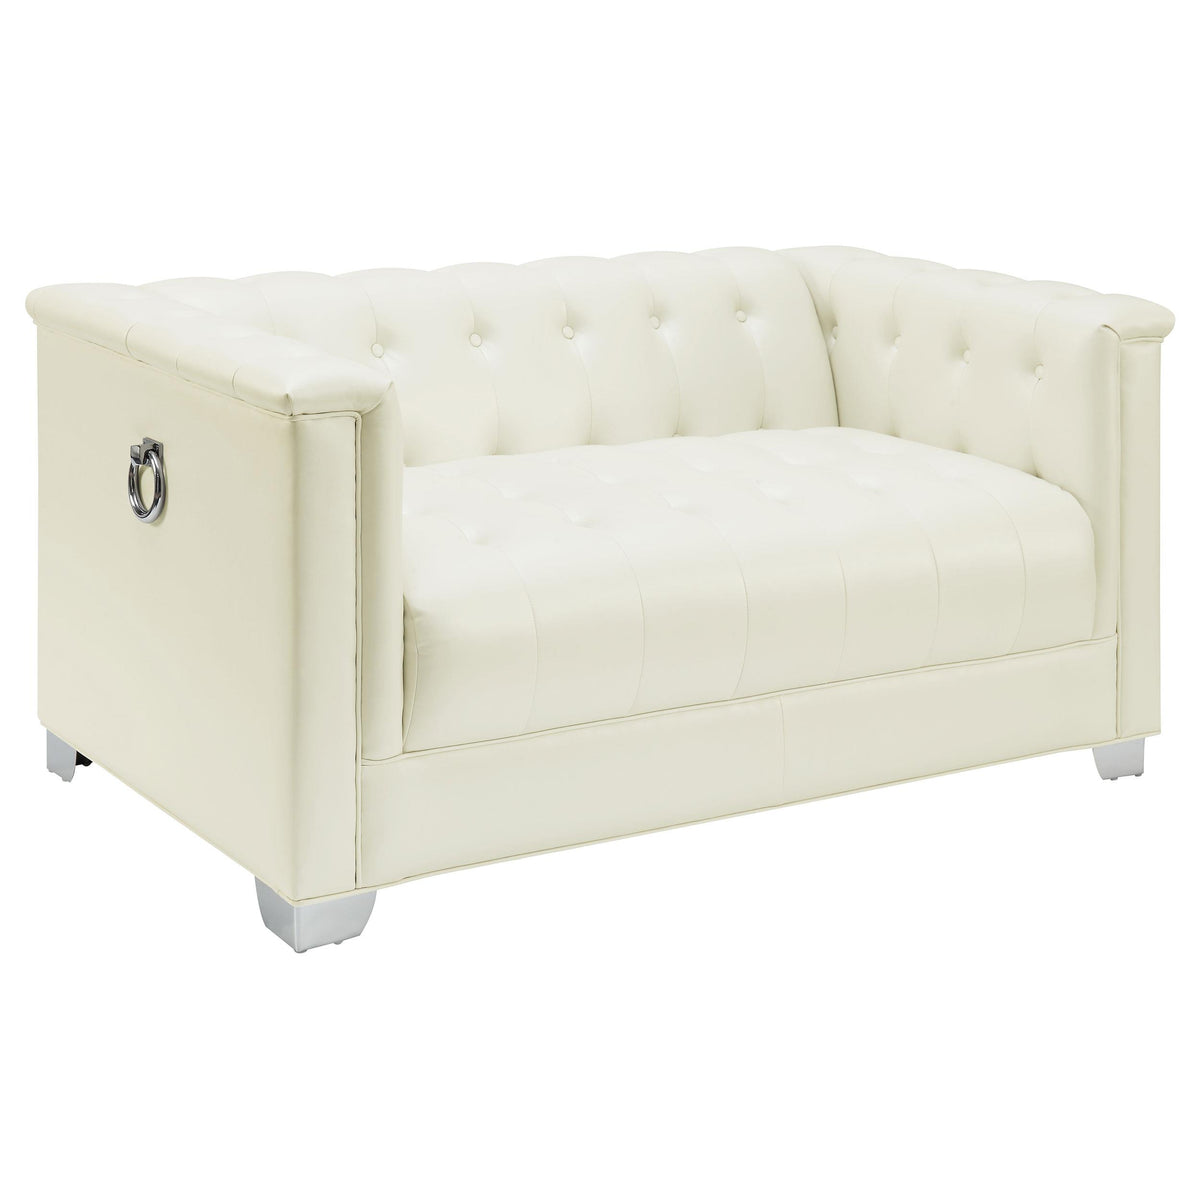 Chaviano Tufted Upholstered Loveseat Pearl White  Las Vegas Furniture Stores